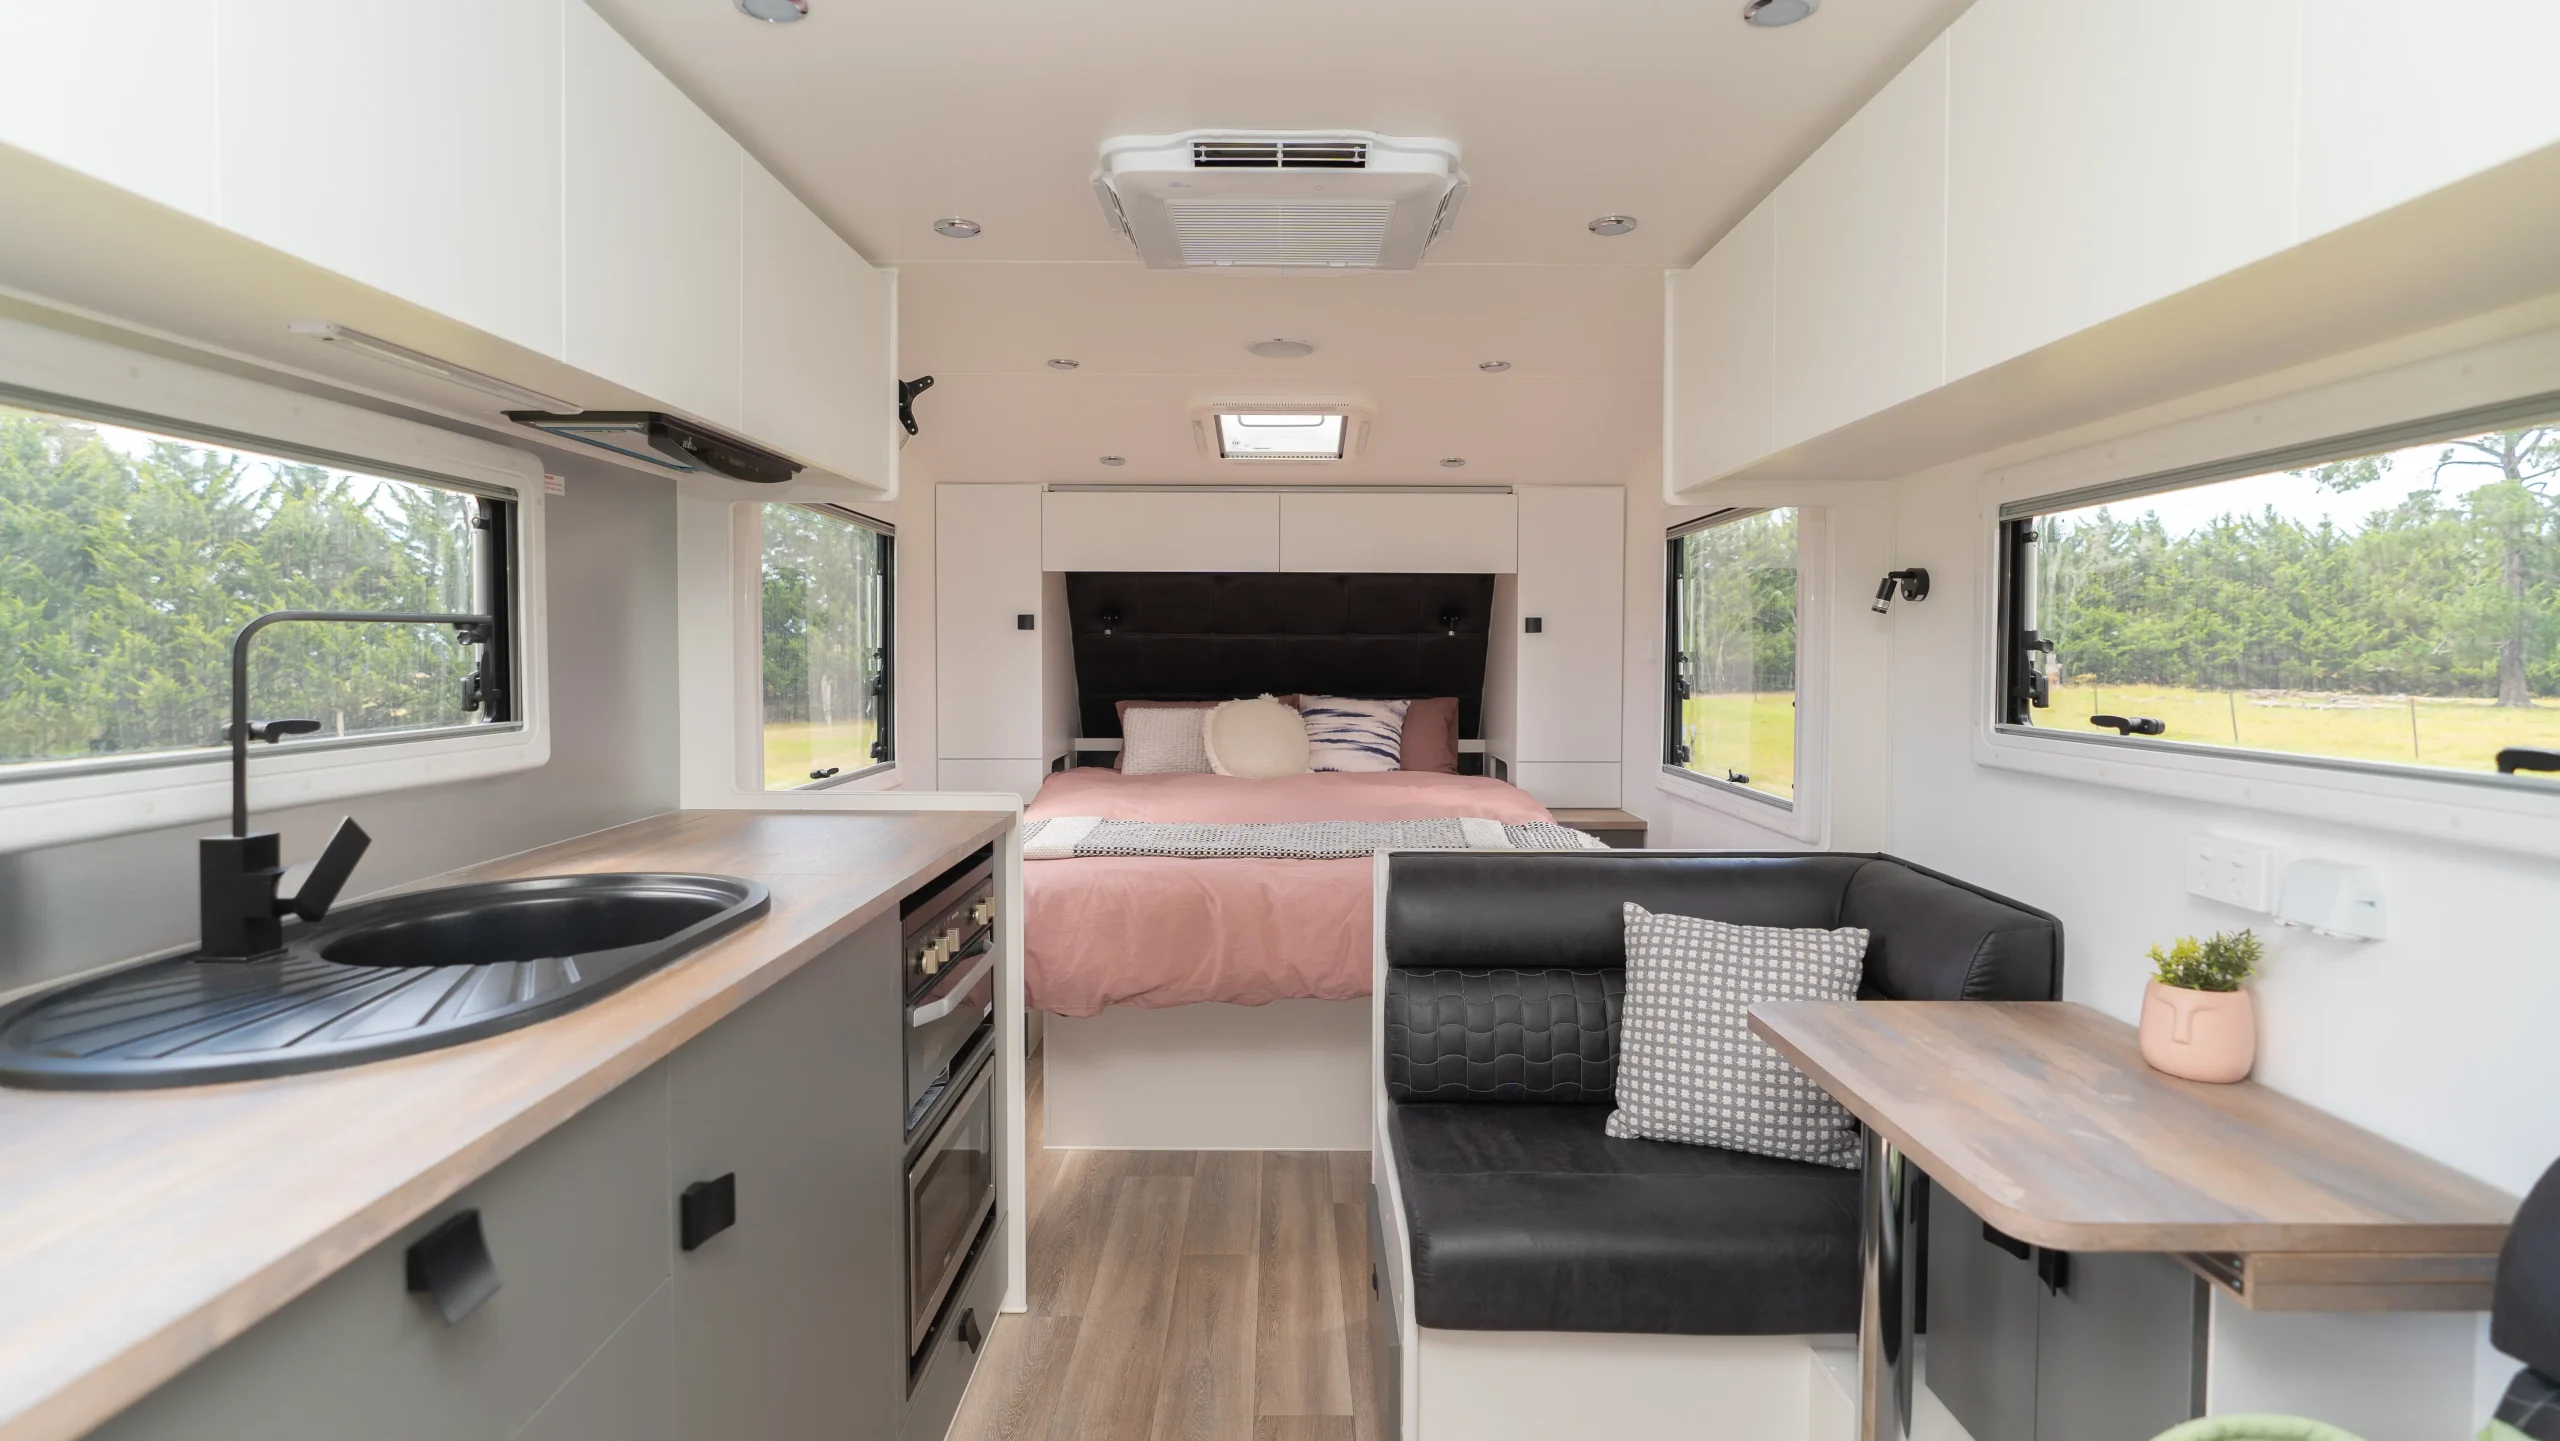 Things to consider when buying your first caravan